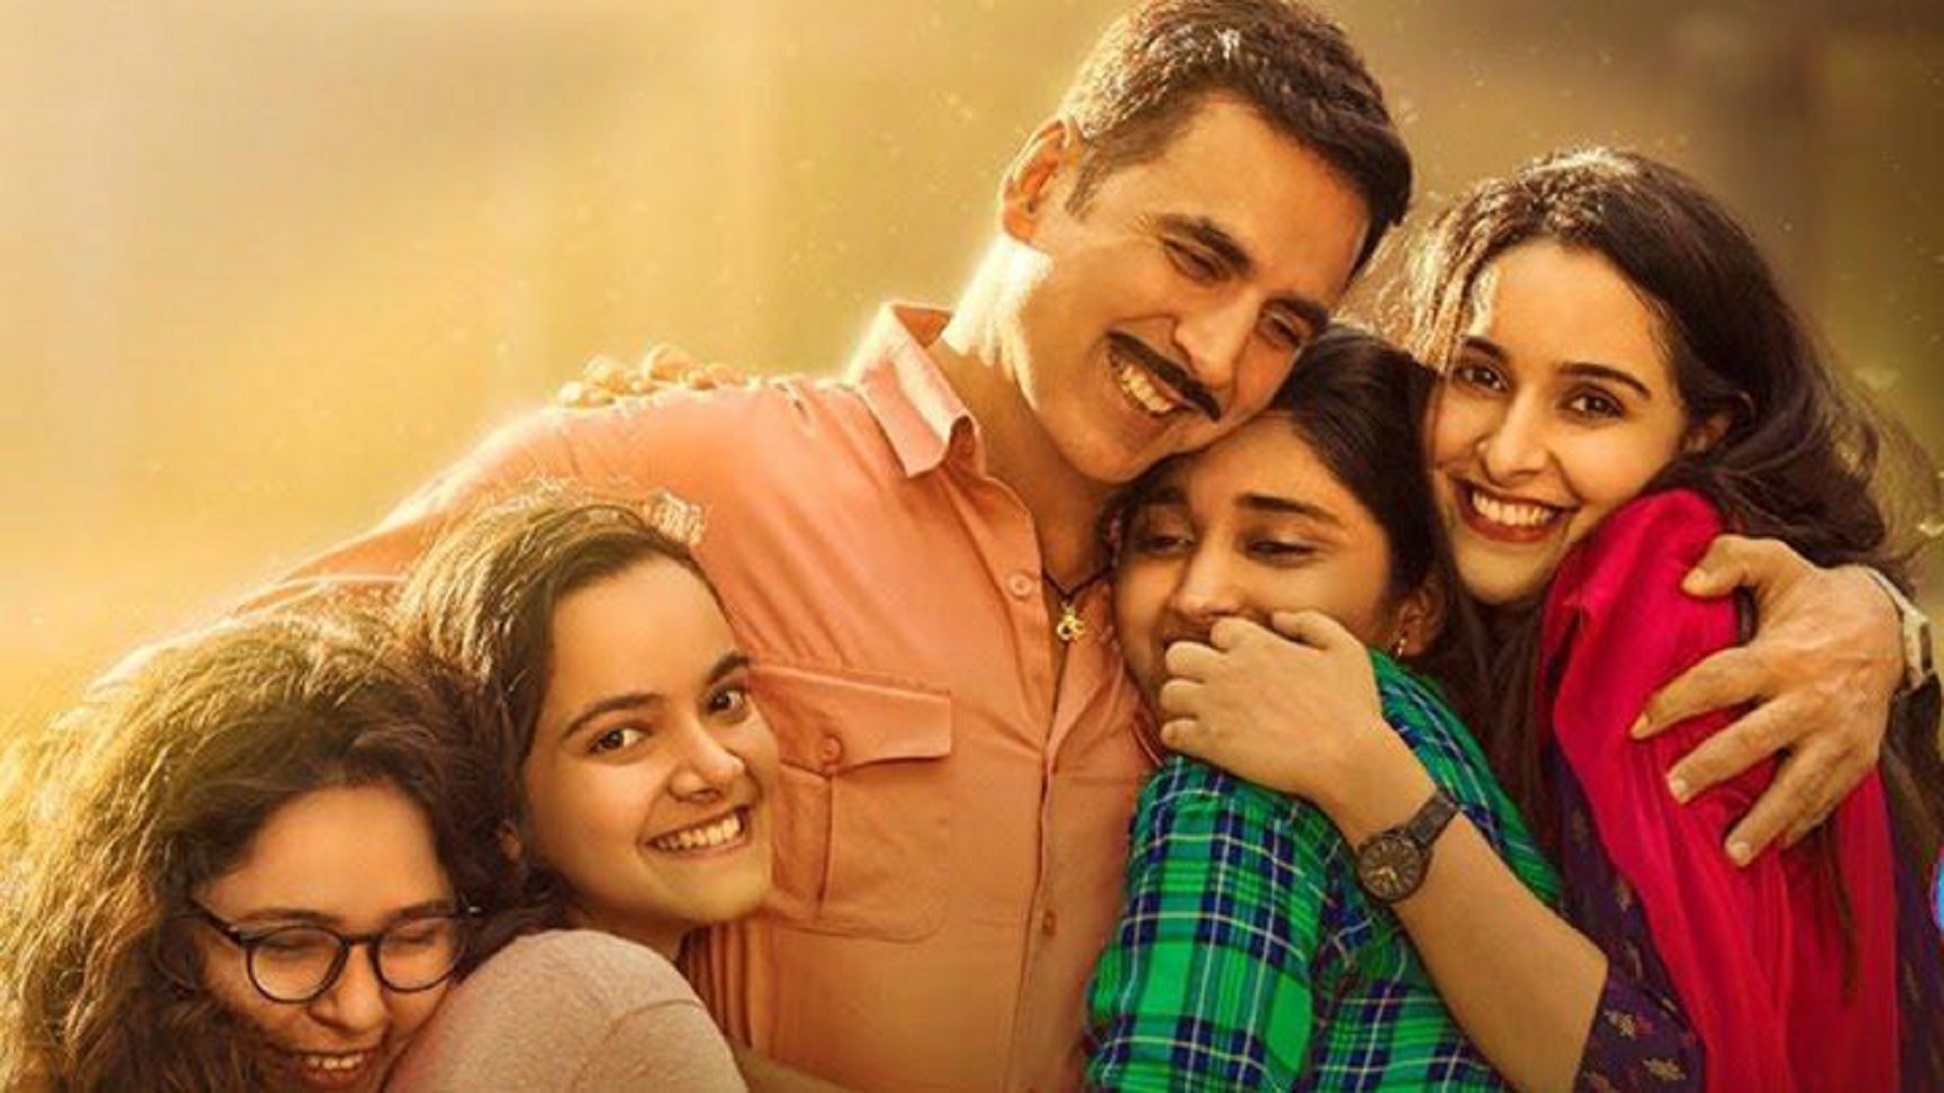 Akshay Kumar’s New Movie Raksha Bandhan Is A Comedy With A Social Message That Will Touch Your Heart [Watch Trailer]